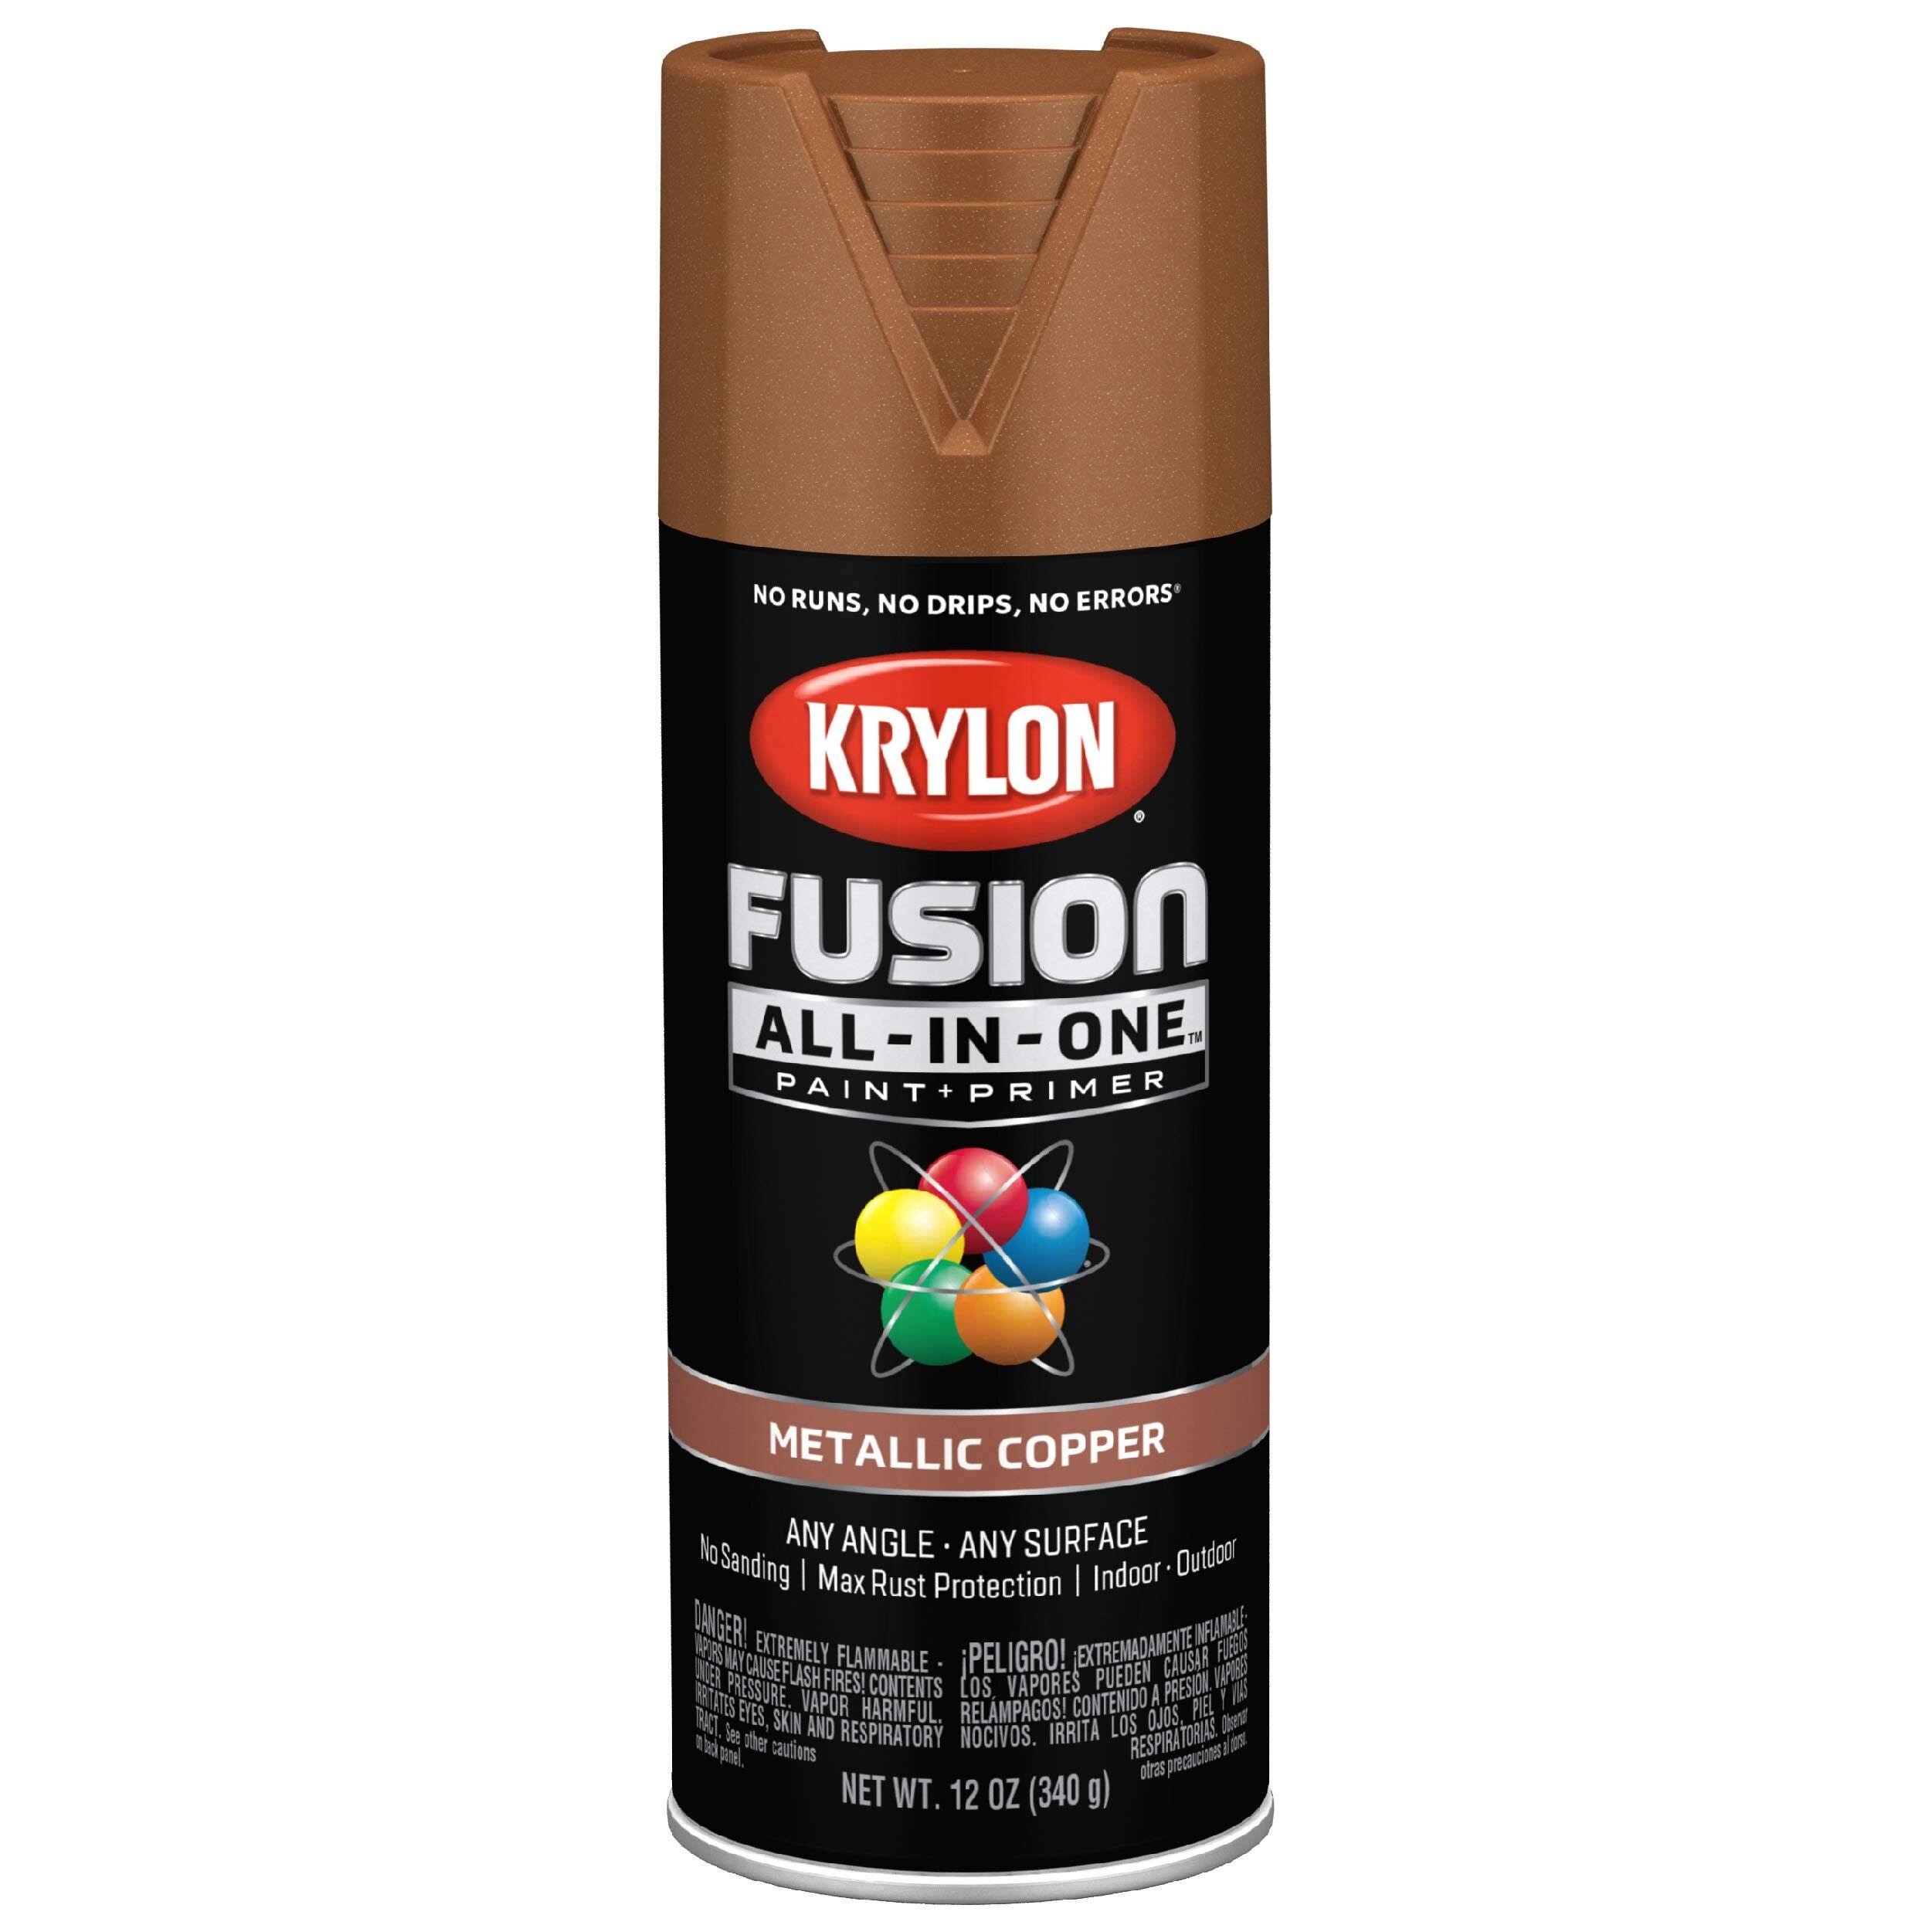 Krylon K02768007 Fusion All-in-One Spray Paint for Indoor/Outdoor Use, Metallic Copper